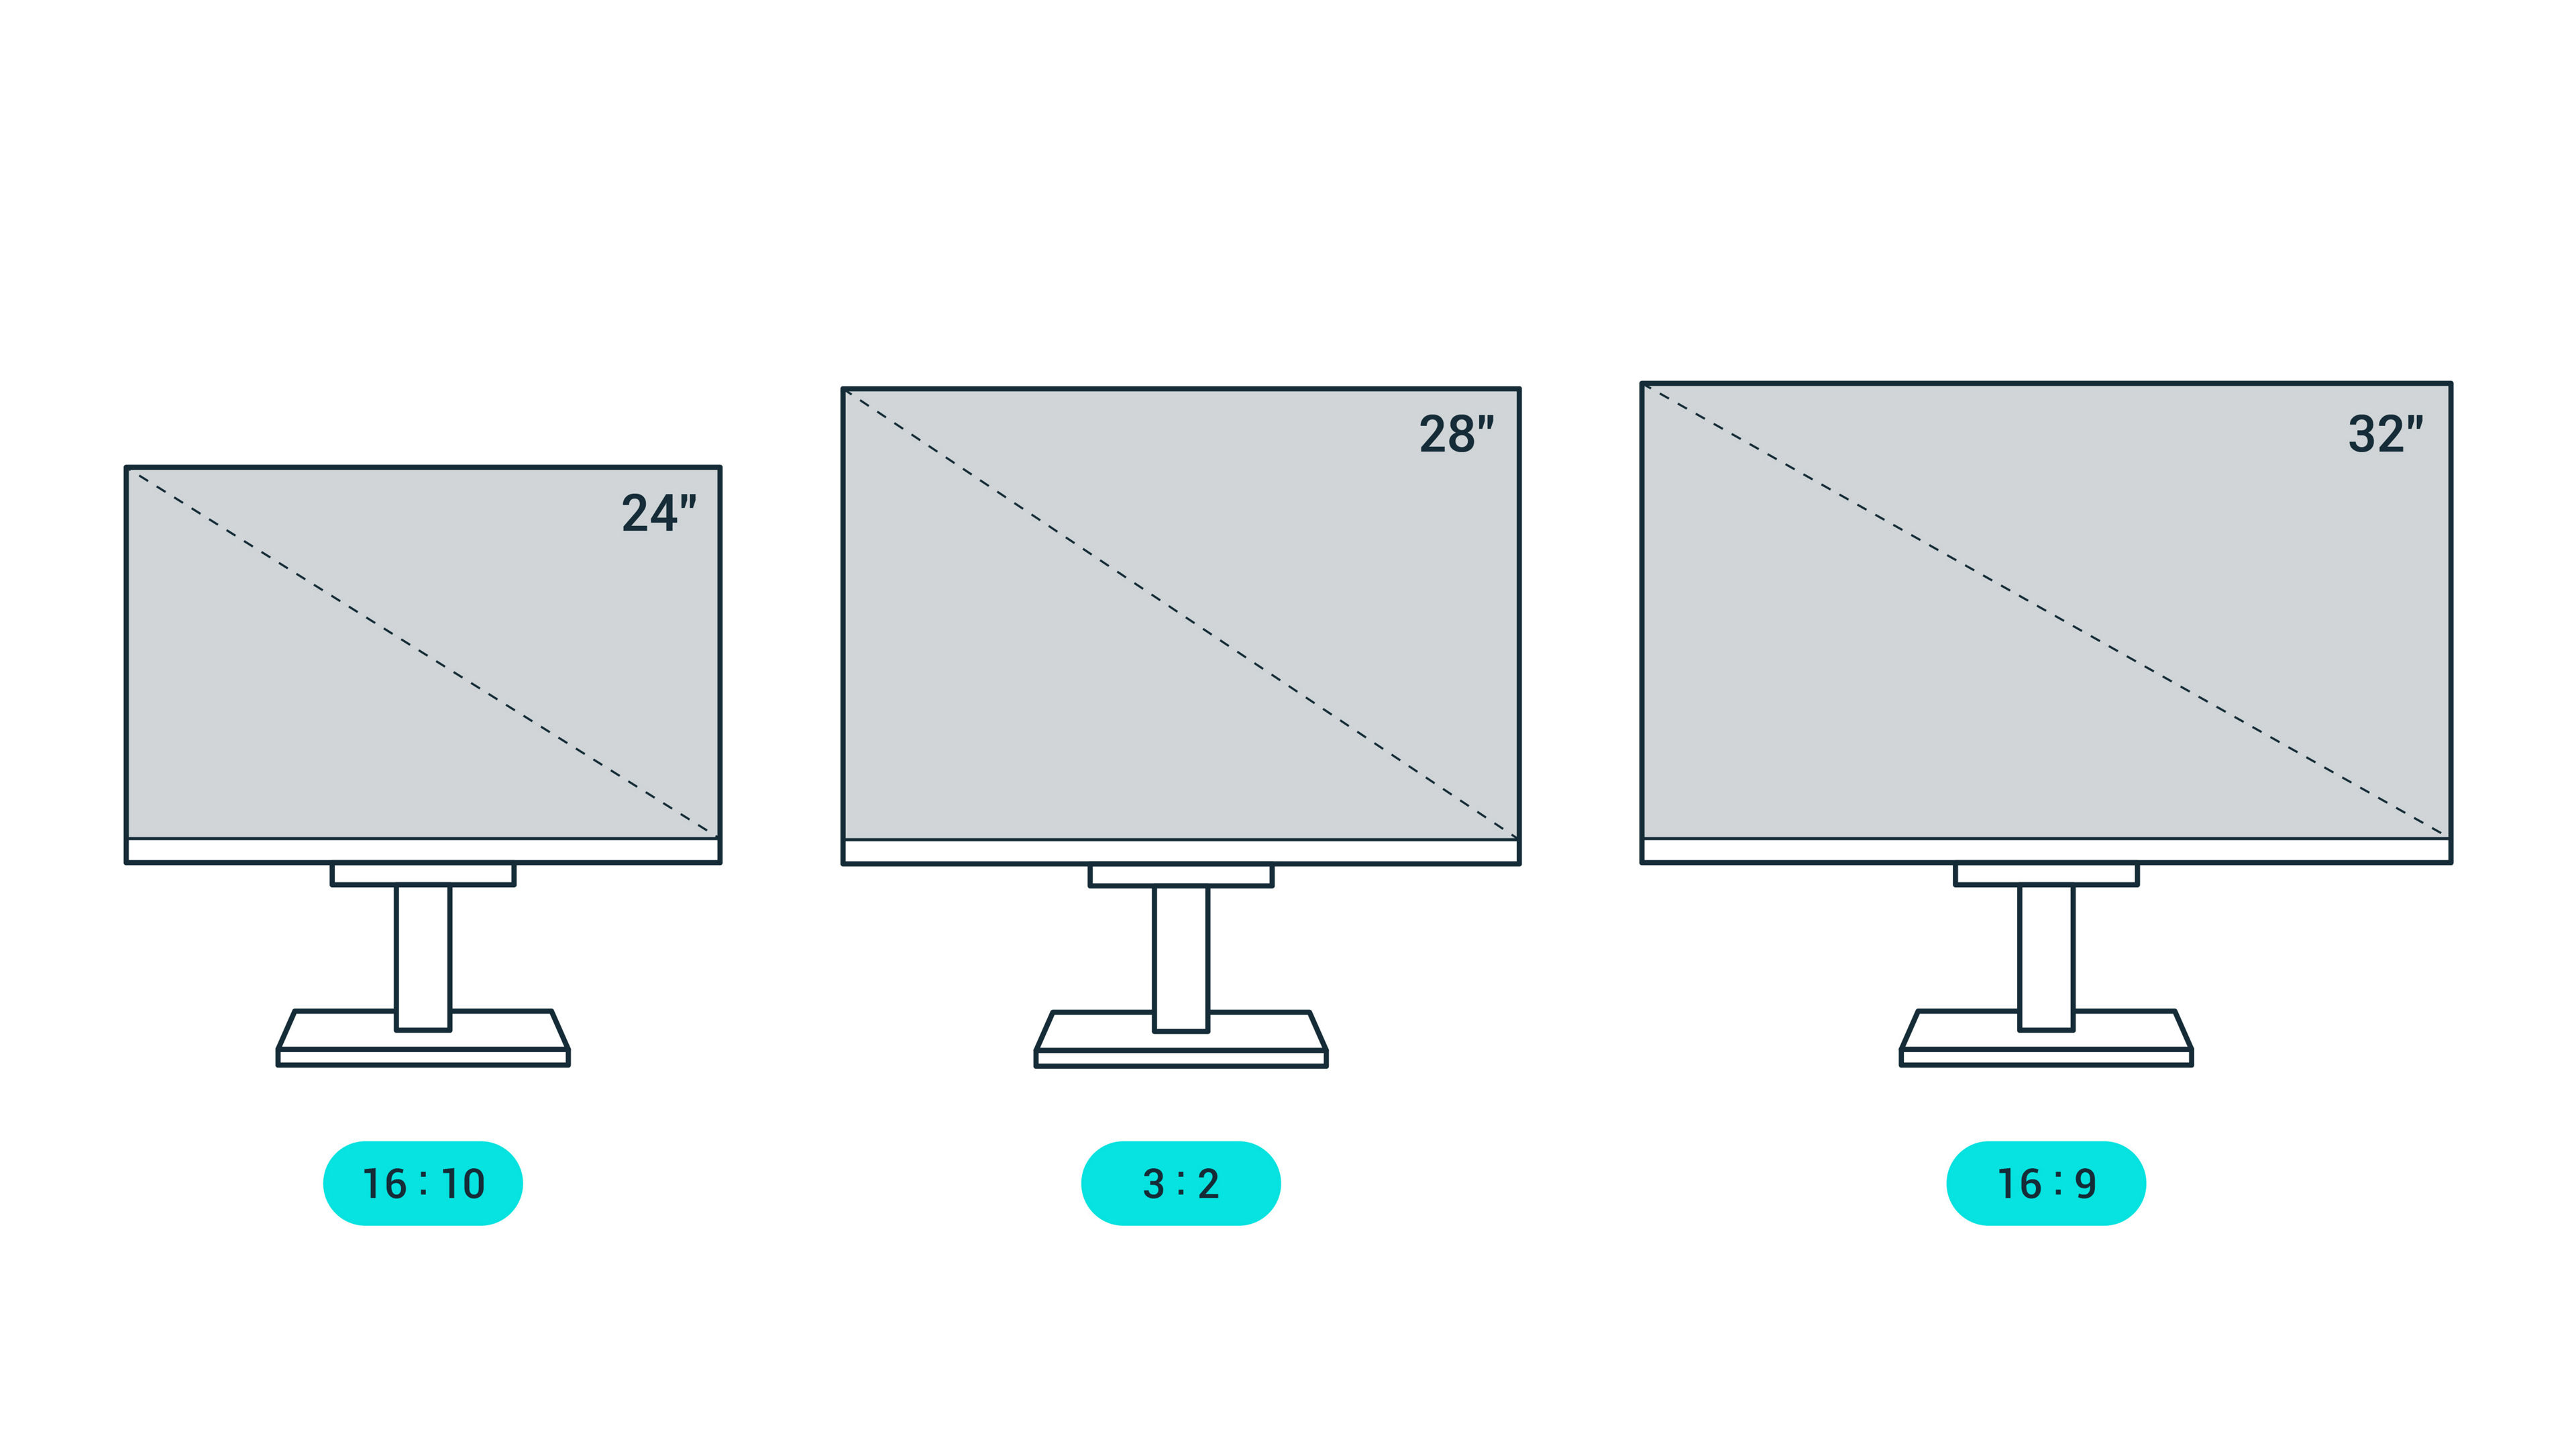 How to Select the Best Monitor Size for Programming